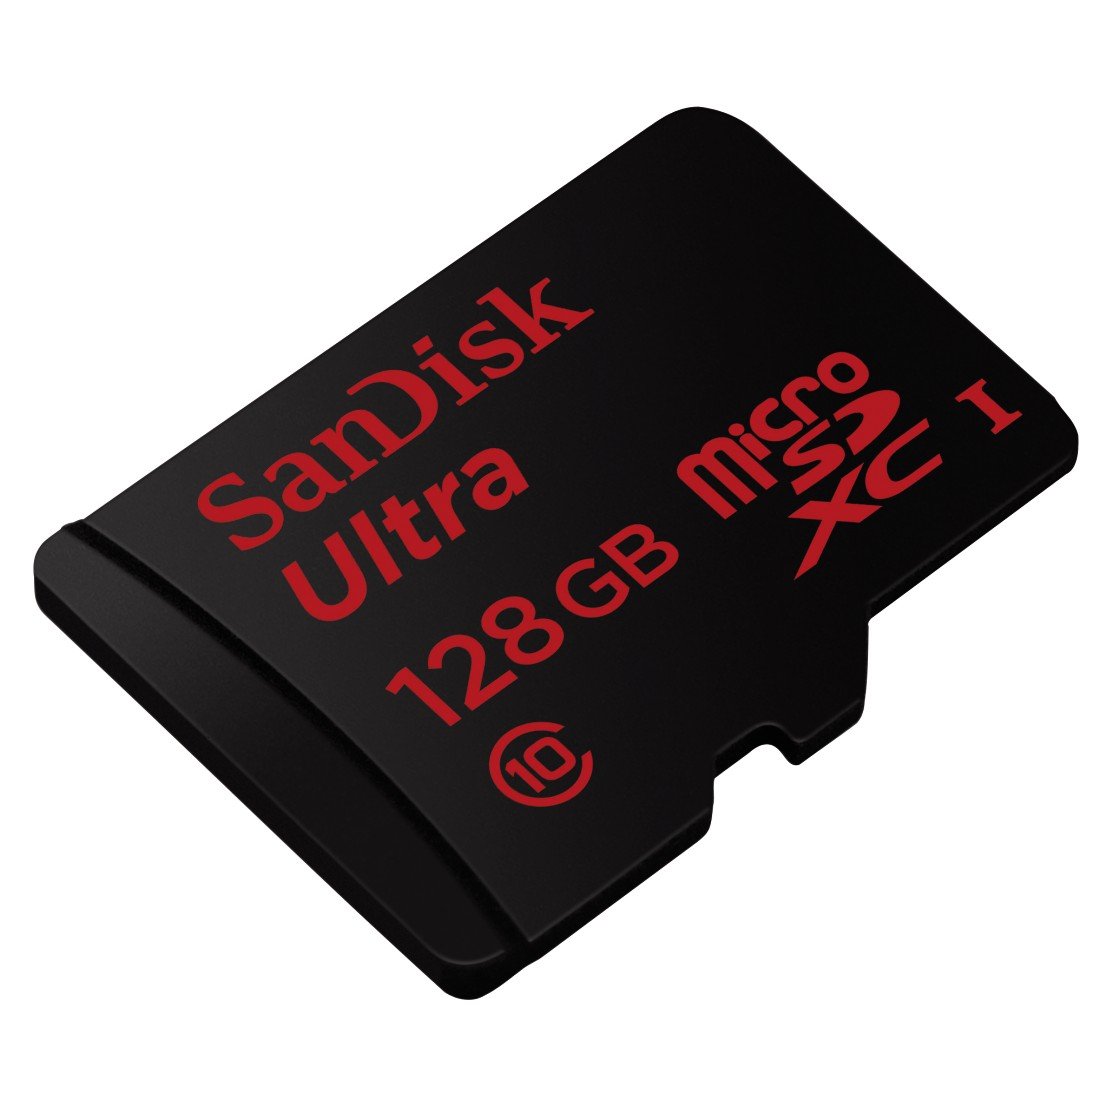 SanDisk Ultra 128GB UHS-I/Class 10 Micro SDXC Memory Card Up To 48MB/s With Adapter- SDSQUNC-128G